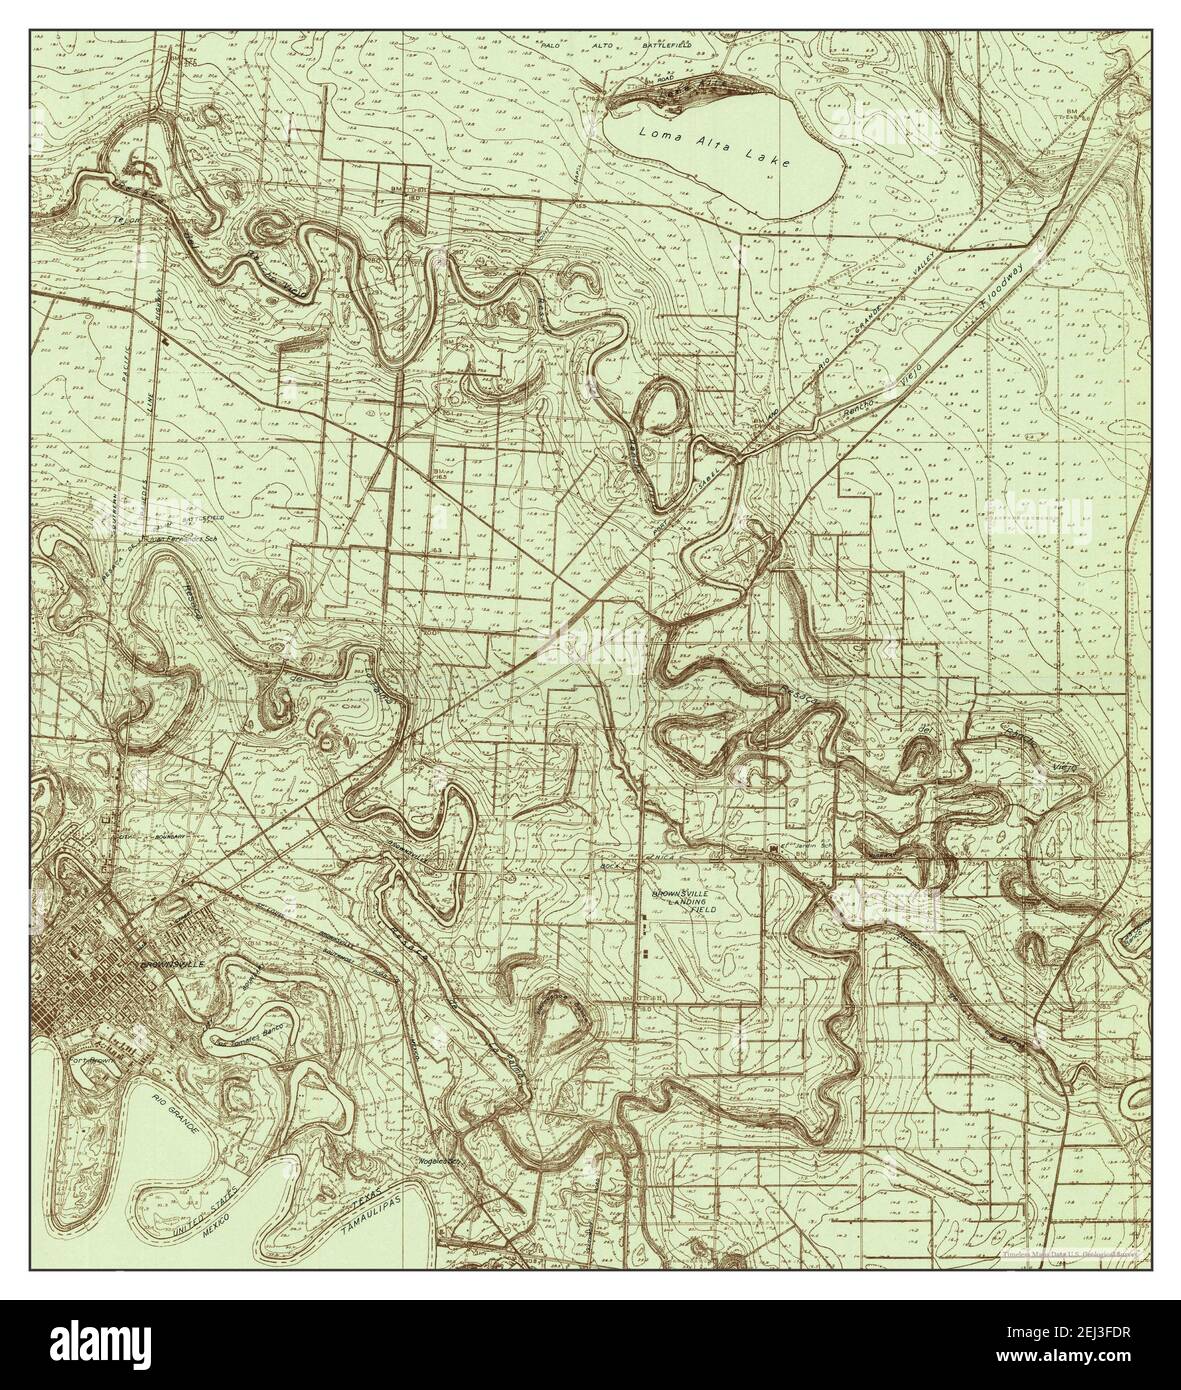 East Brownsville, Texas, map 1930, 1:24000, United States of America by Timeless Maps, data U.S. Geological Survey Stock Photo